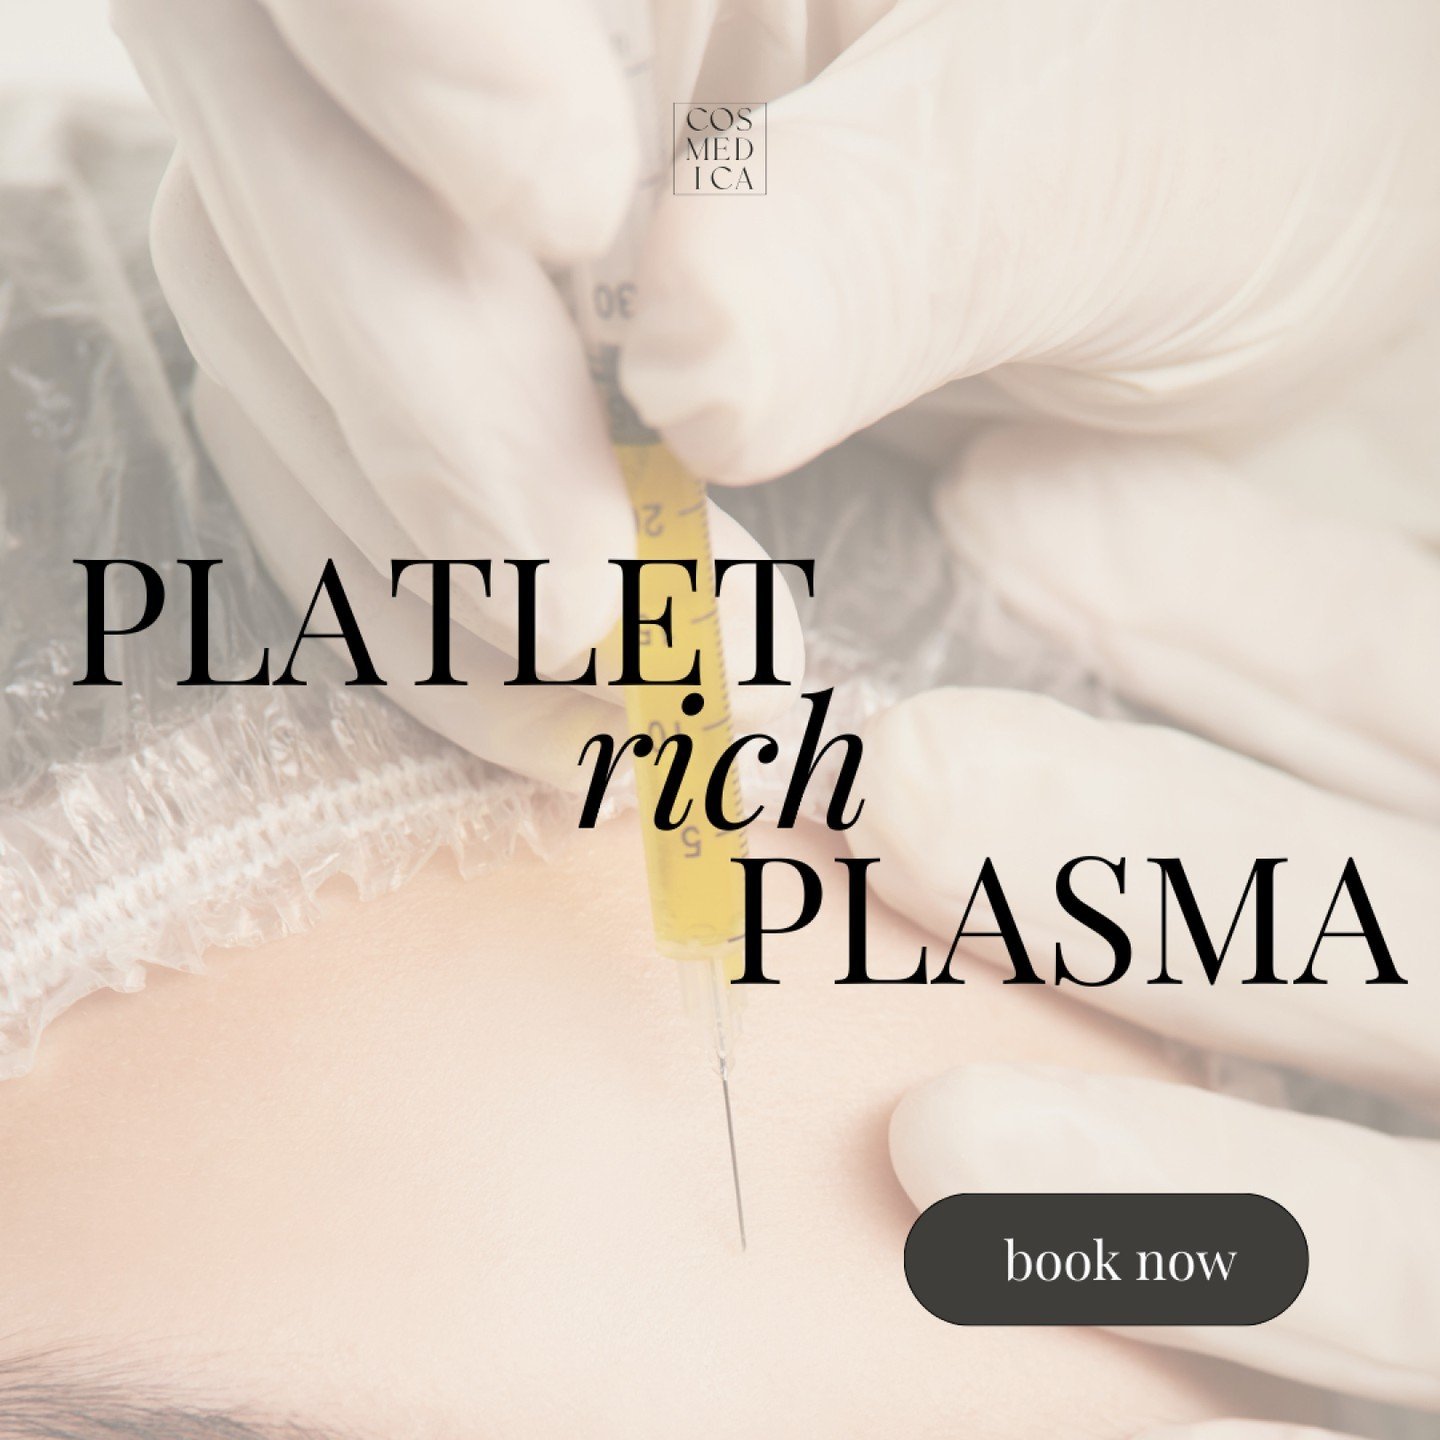 Platelet rich plasma (PRP), also known as the &ldquo;vampire facial&rdquo;, is a fast injectable treatment that can improve your pore size, acne scars, fine lines and wrinkles. It can improve texture of the skin, correct mild volume loss and can even